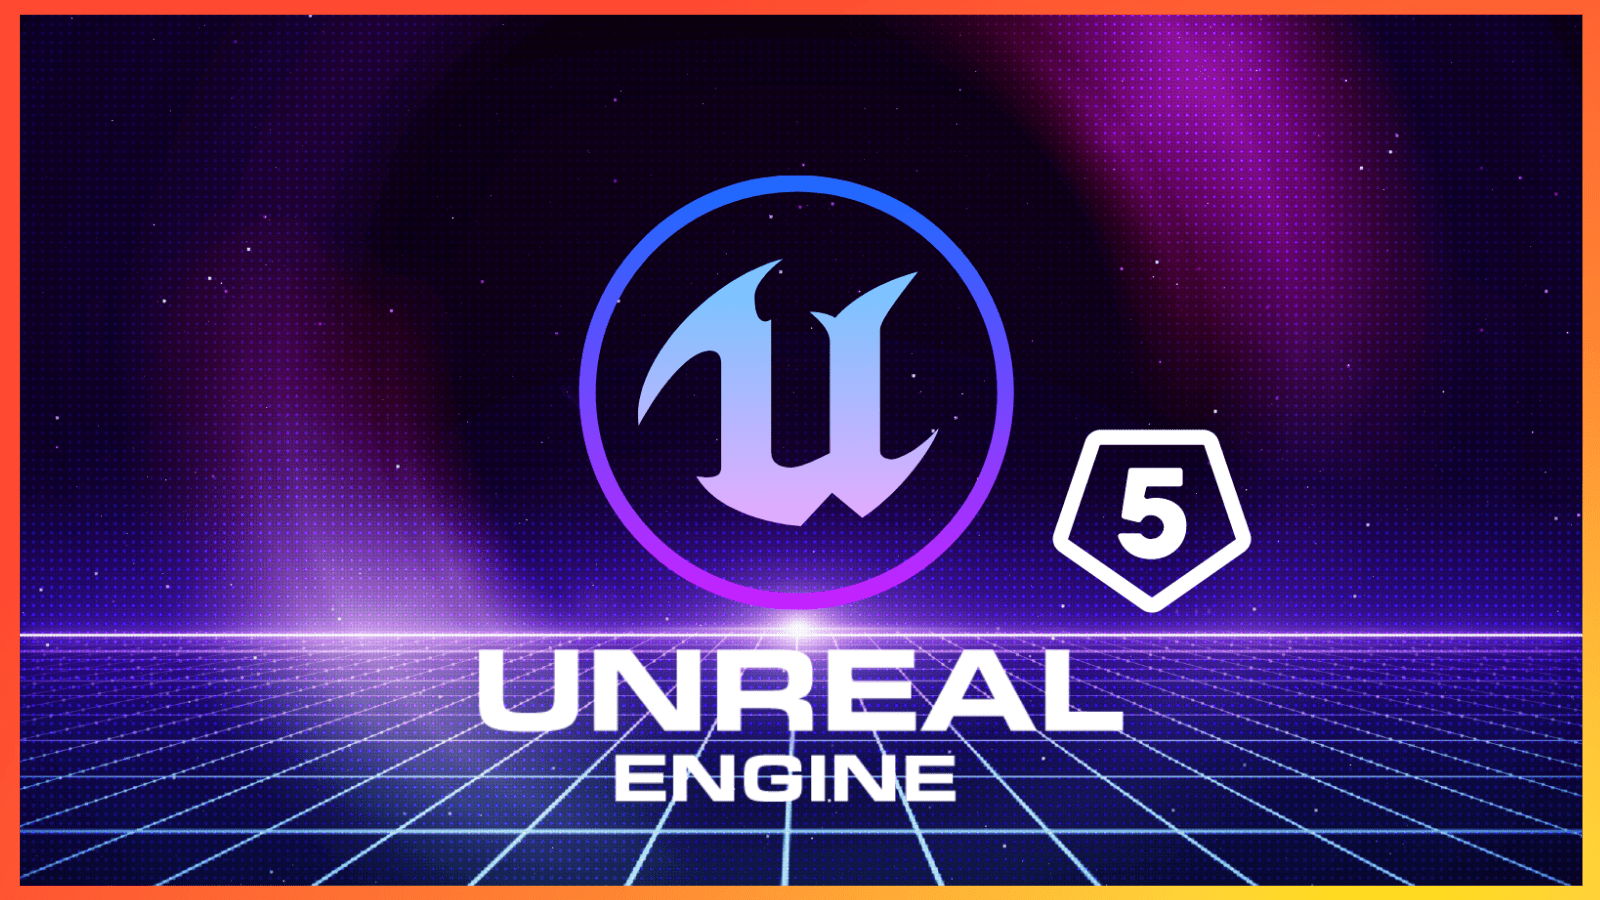 UNREAL ENGINE 5 -POSSIBLE IMPACT IN THE GAME INDUSTRY